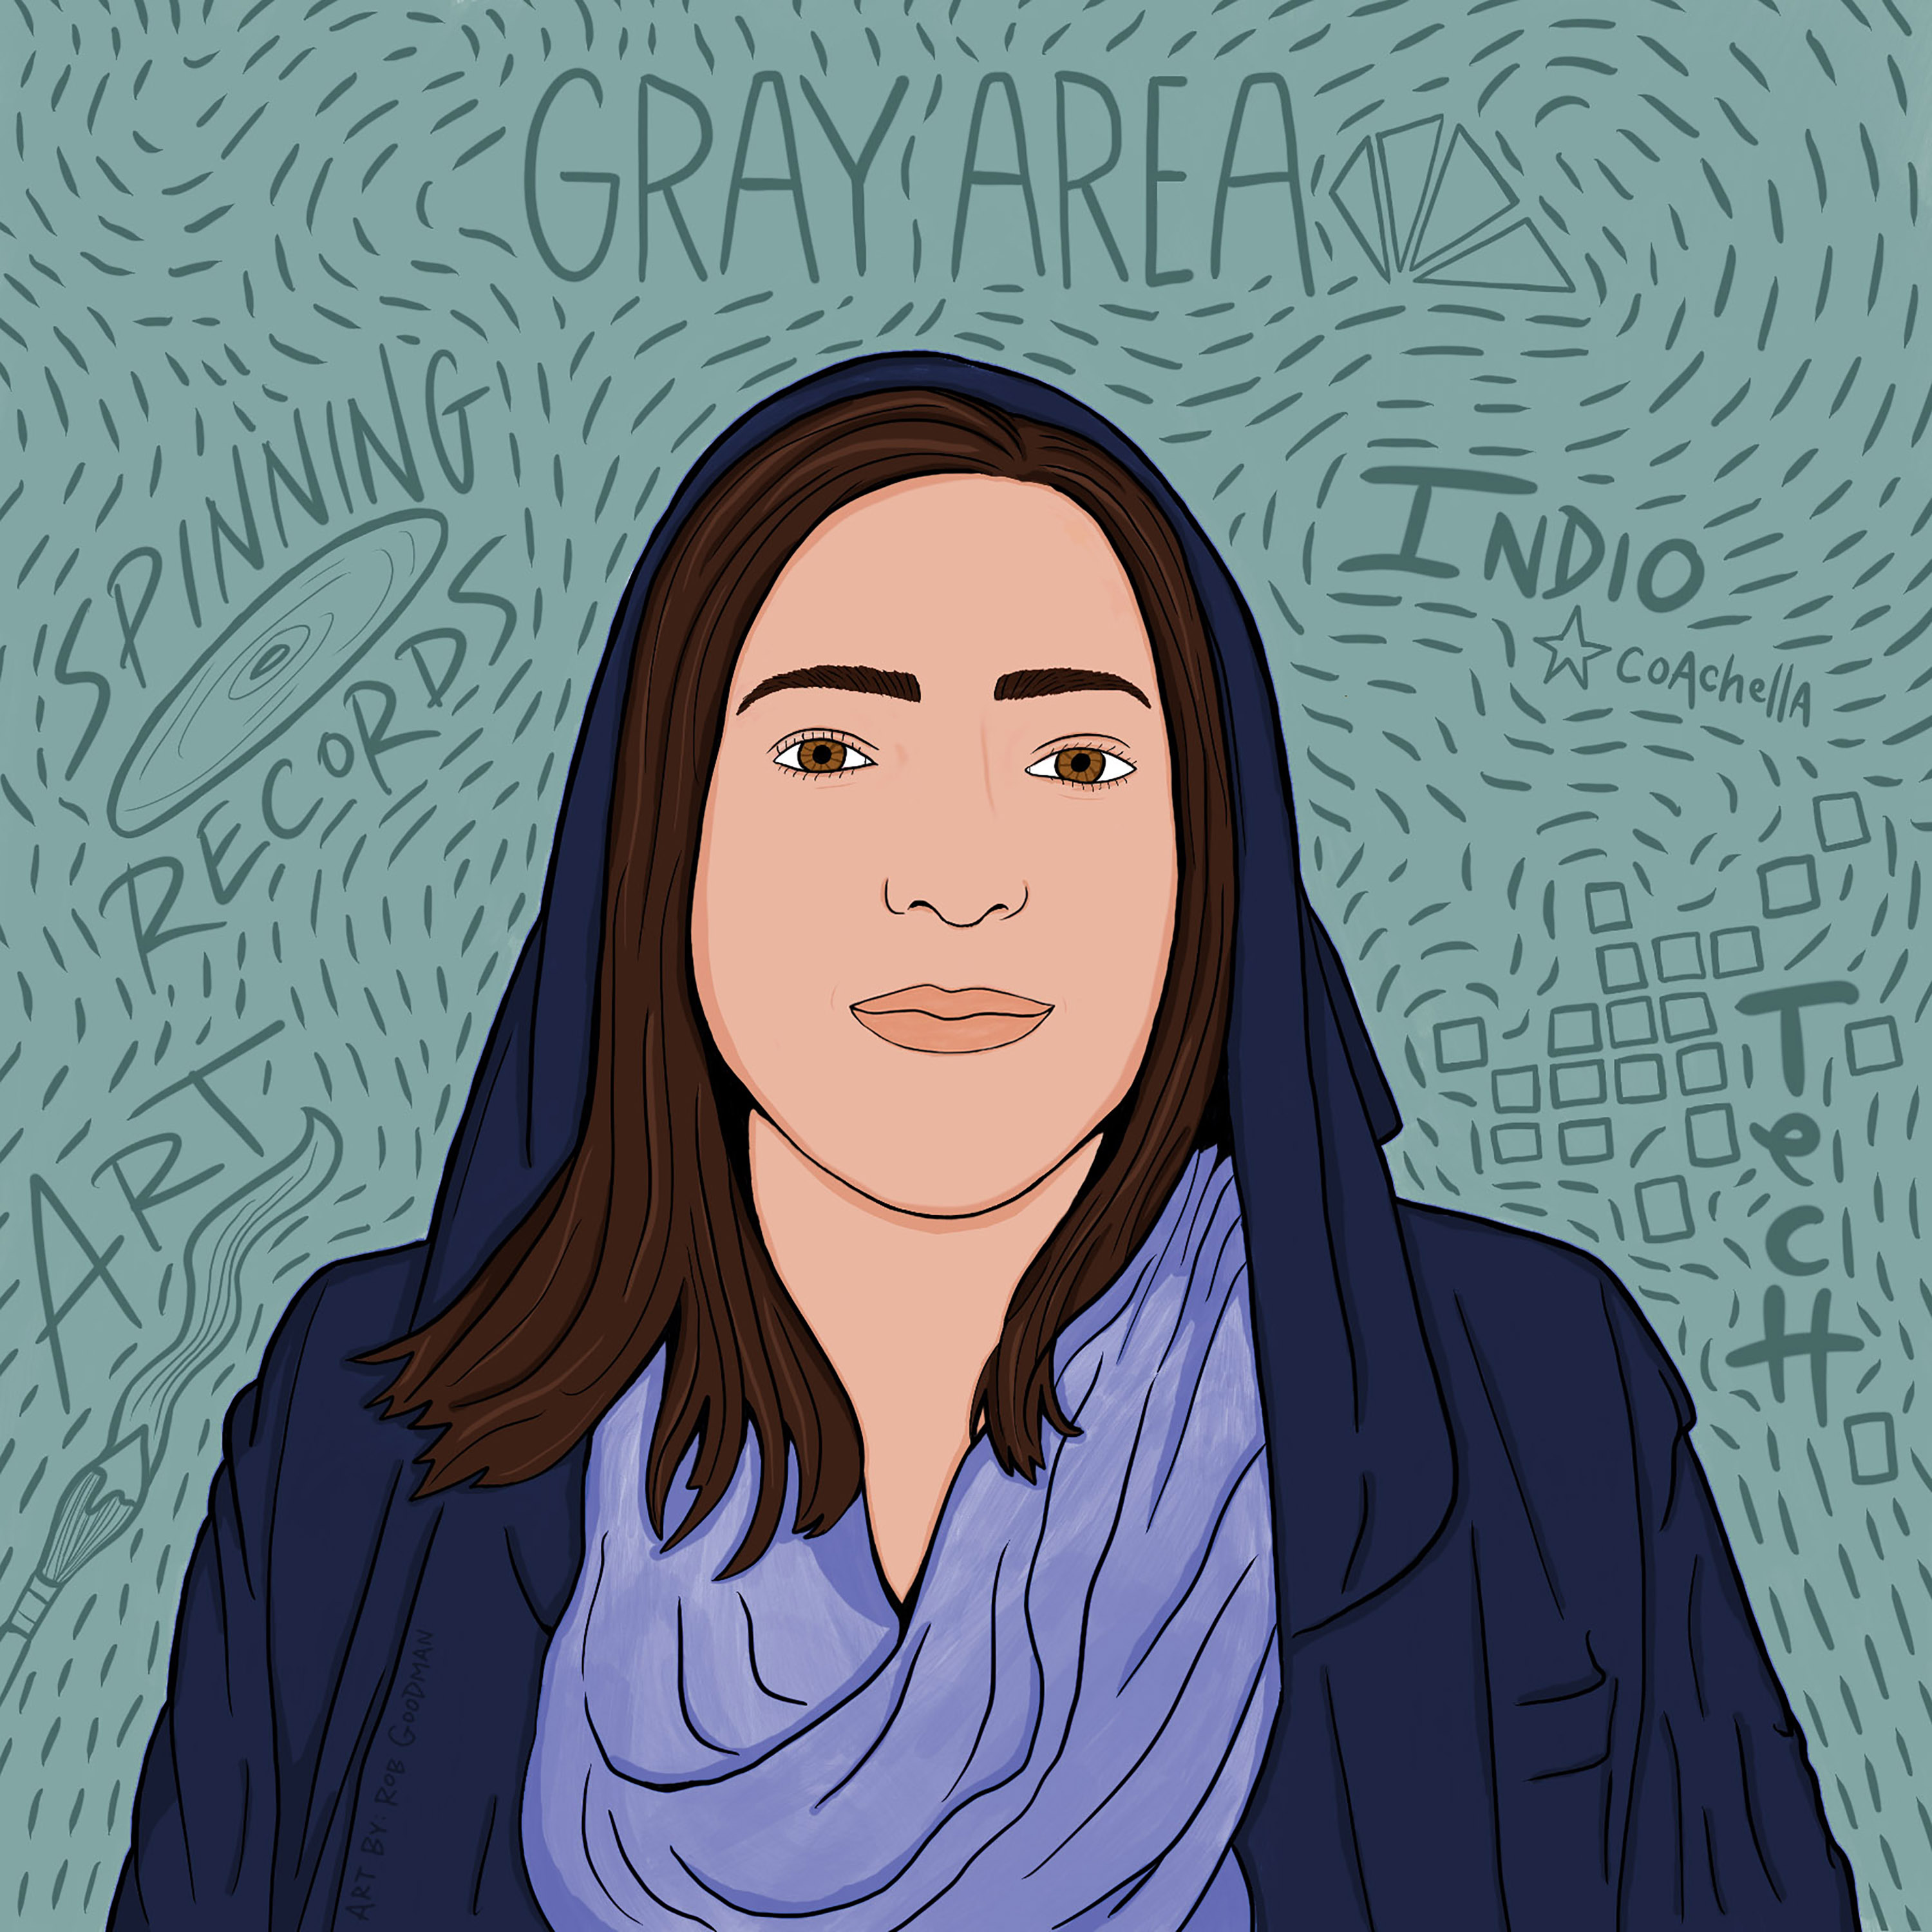 Josette Melchor, Founder of Gray Area Foundation for the Arts